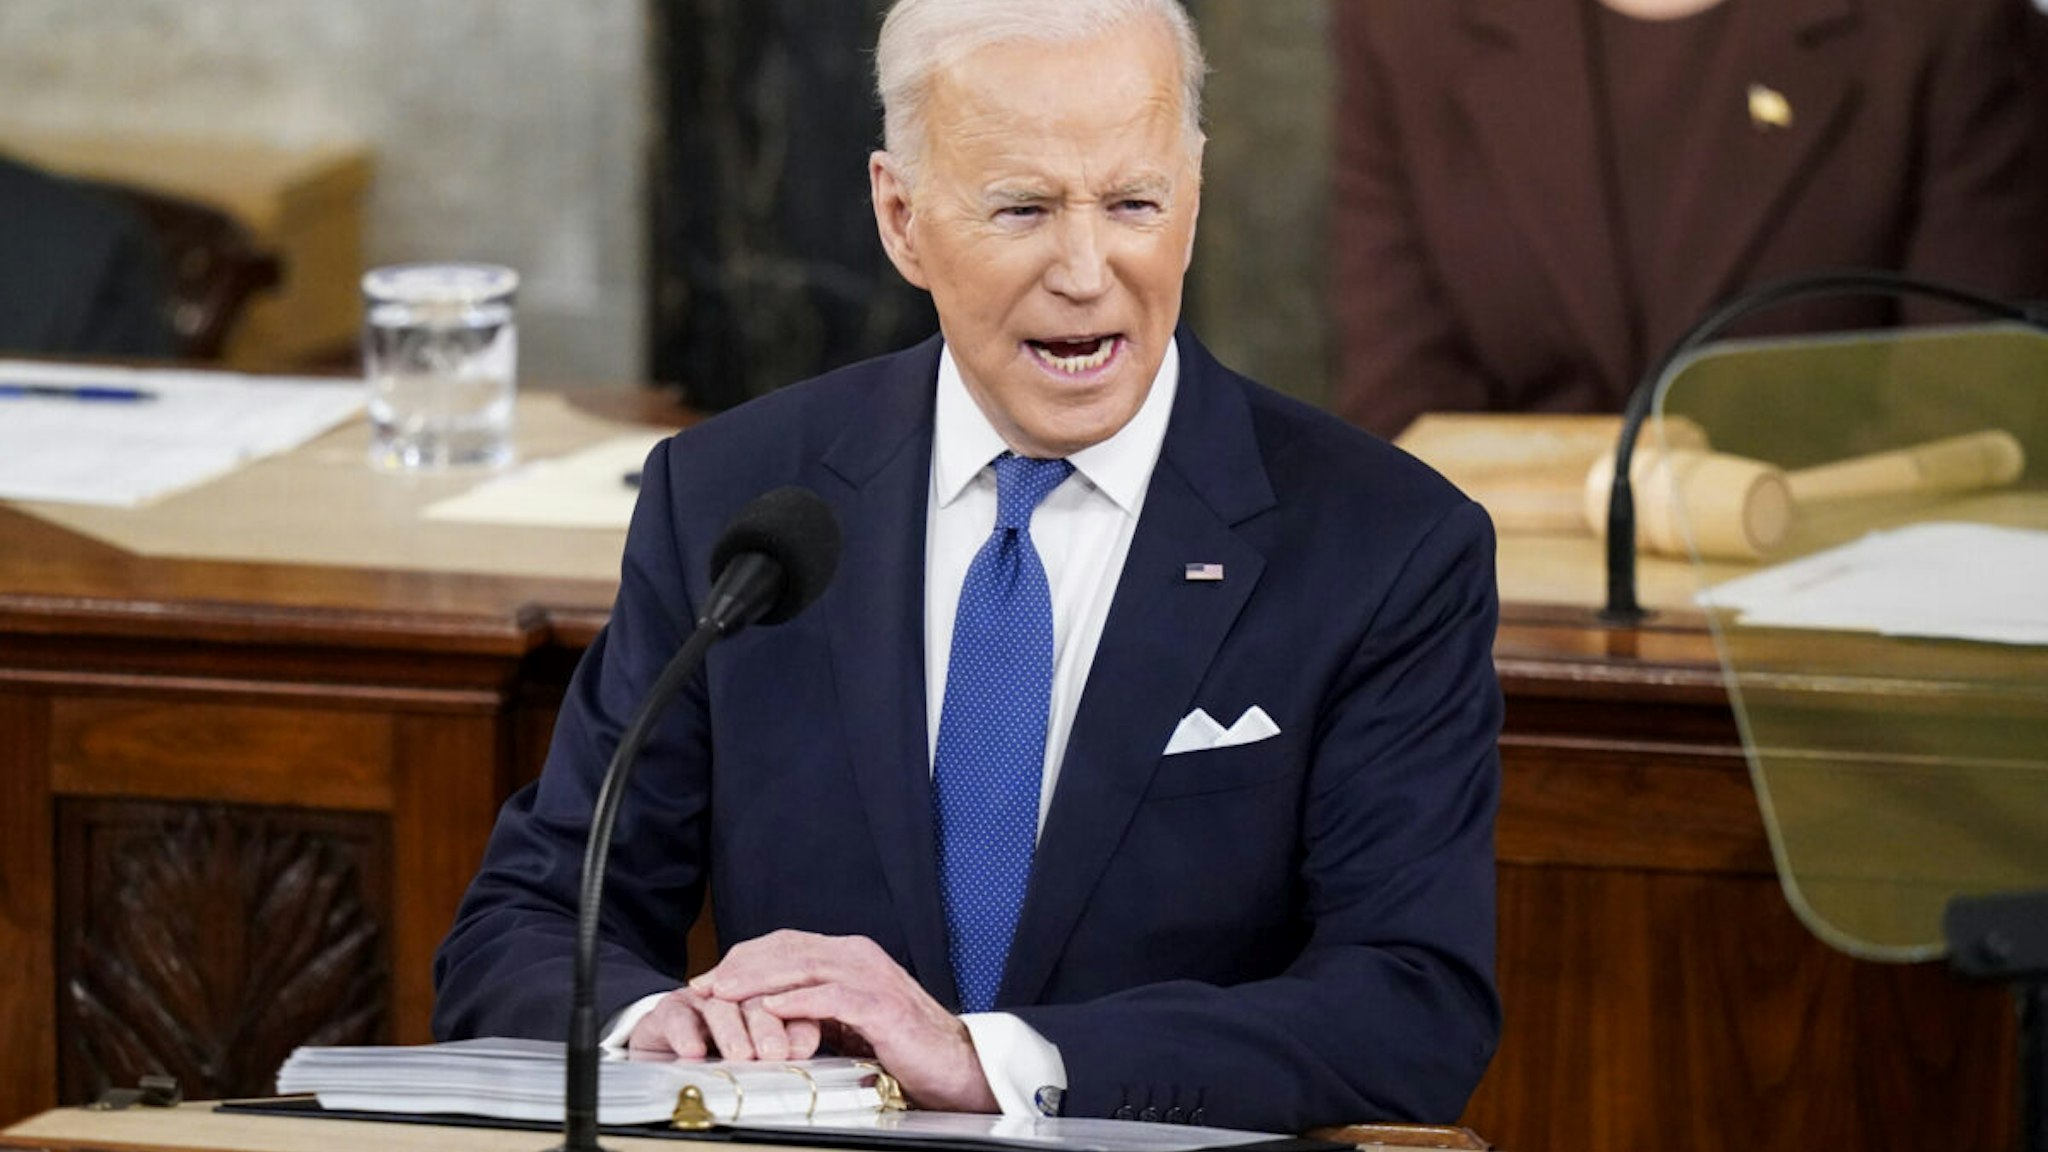 President Joe Biden delivers his State of the Union address to a joint session of Congress on Capitol Hill on Tuesday, March 01, 2022 in Washington, DC.